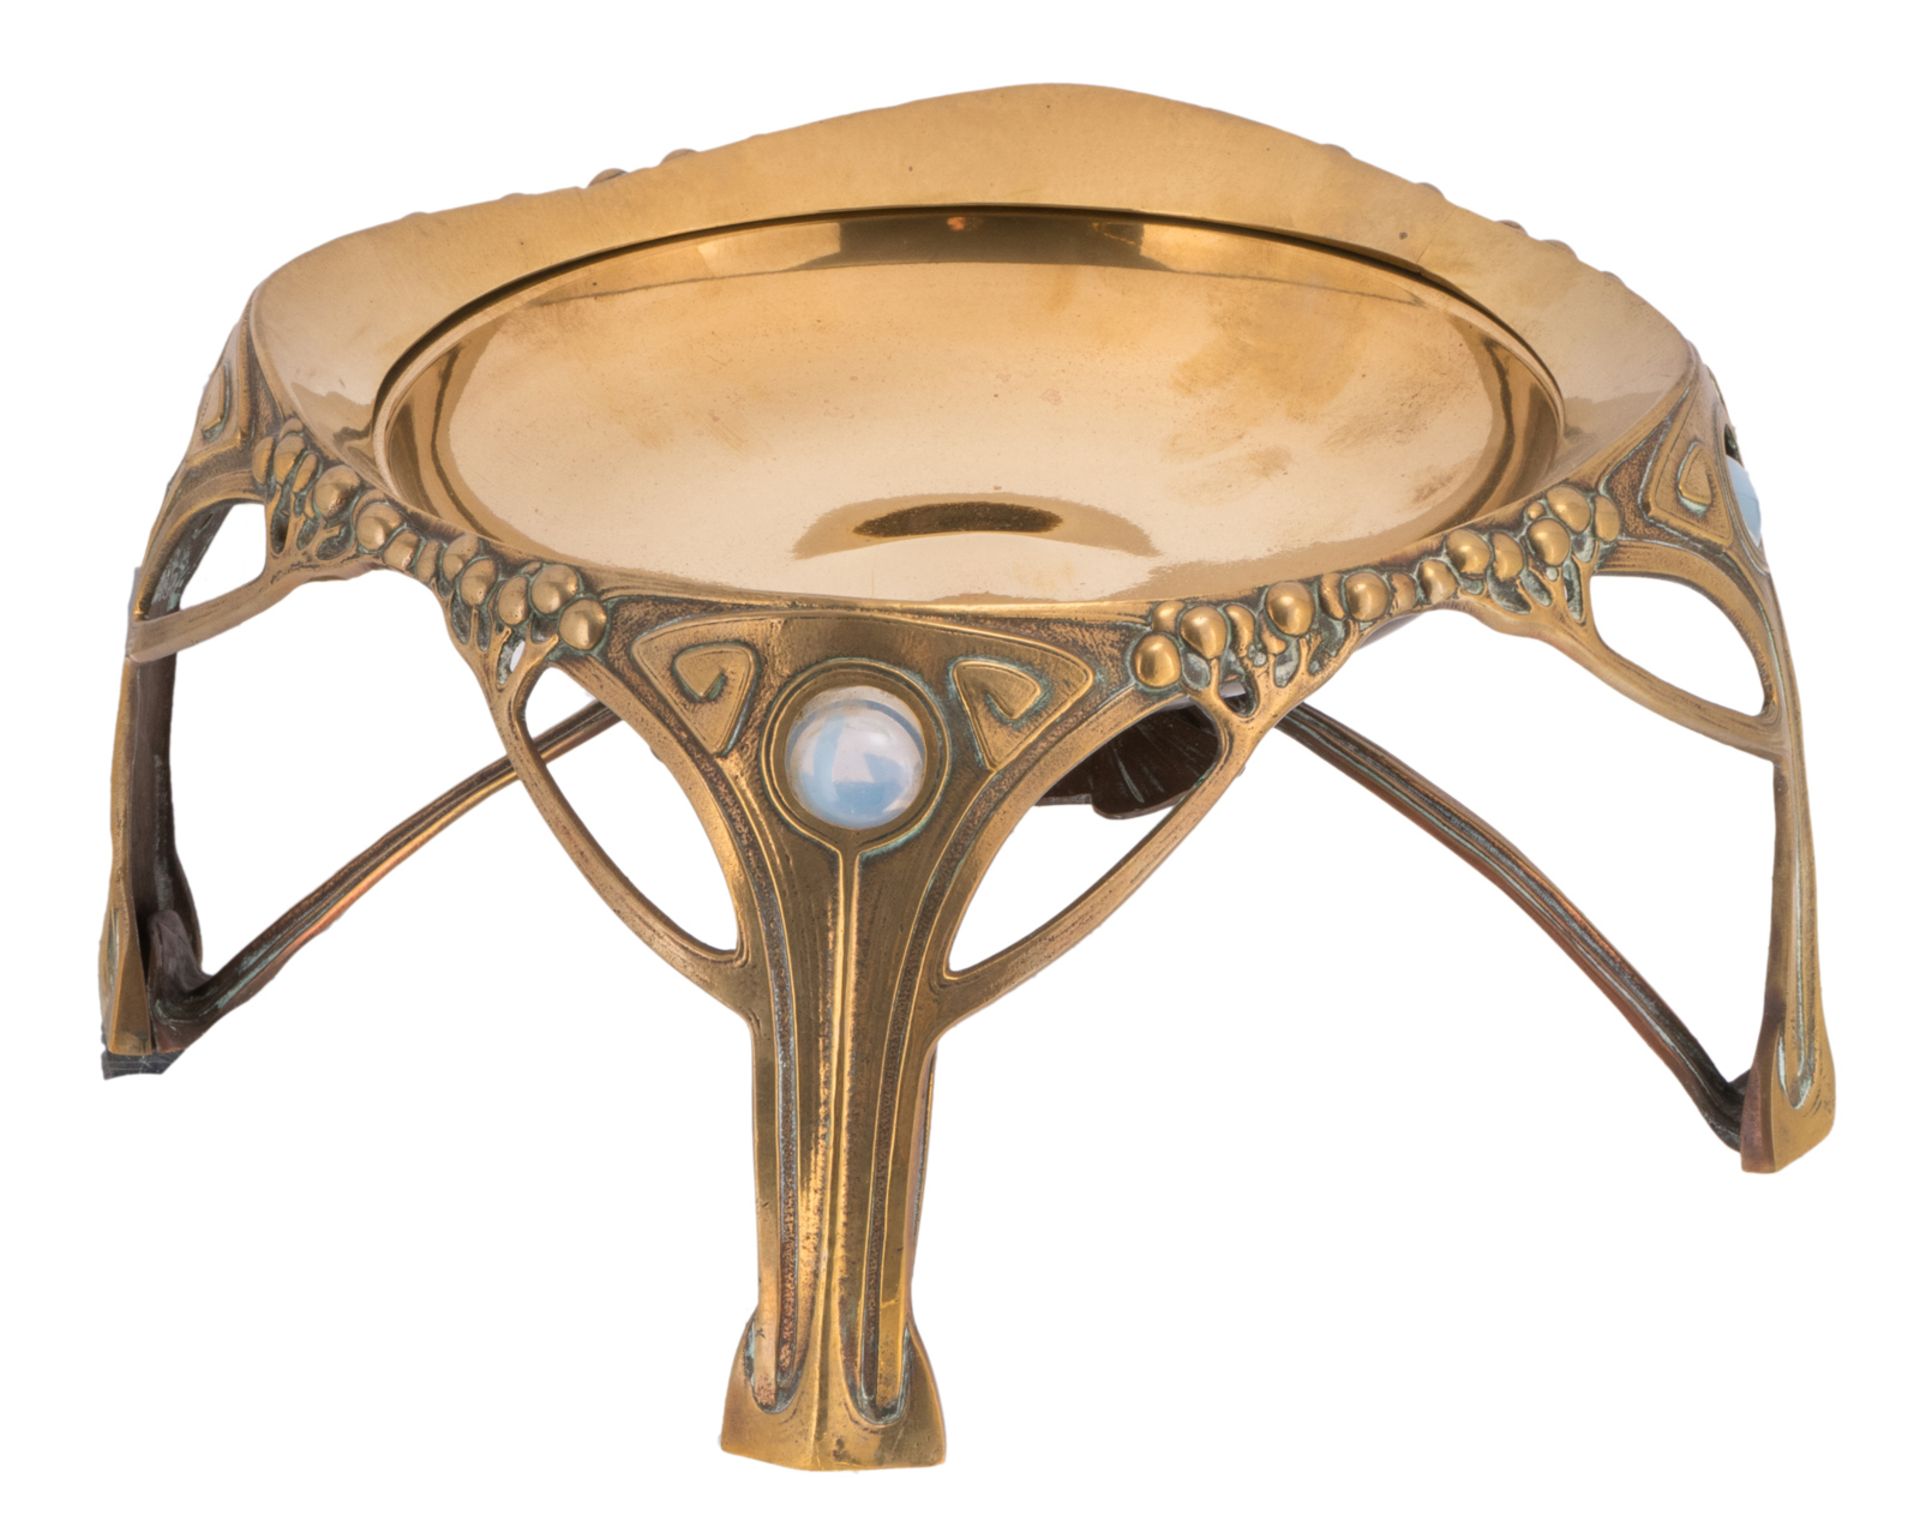 A presumably German gilt brass Jugendstil dish with glass inlay, about 1900, H 14 - W 22,5 cm